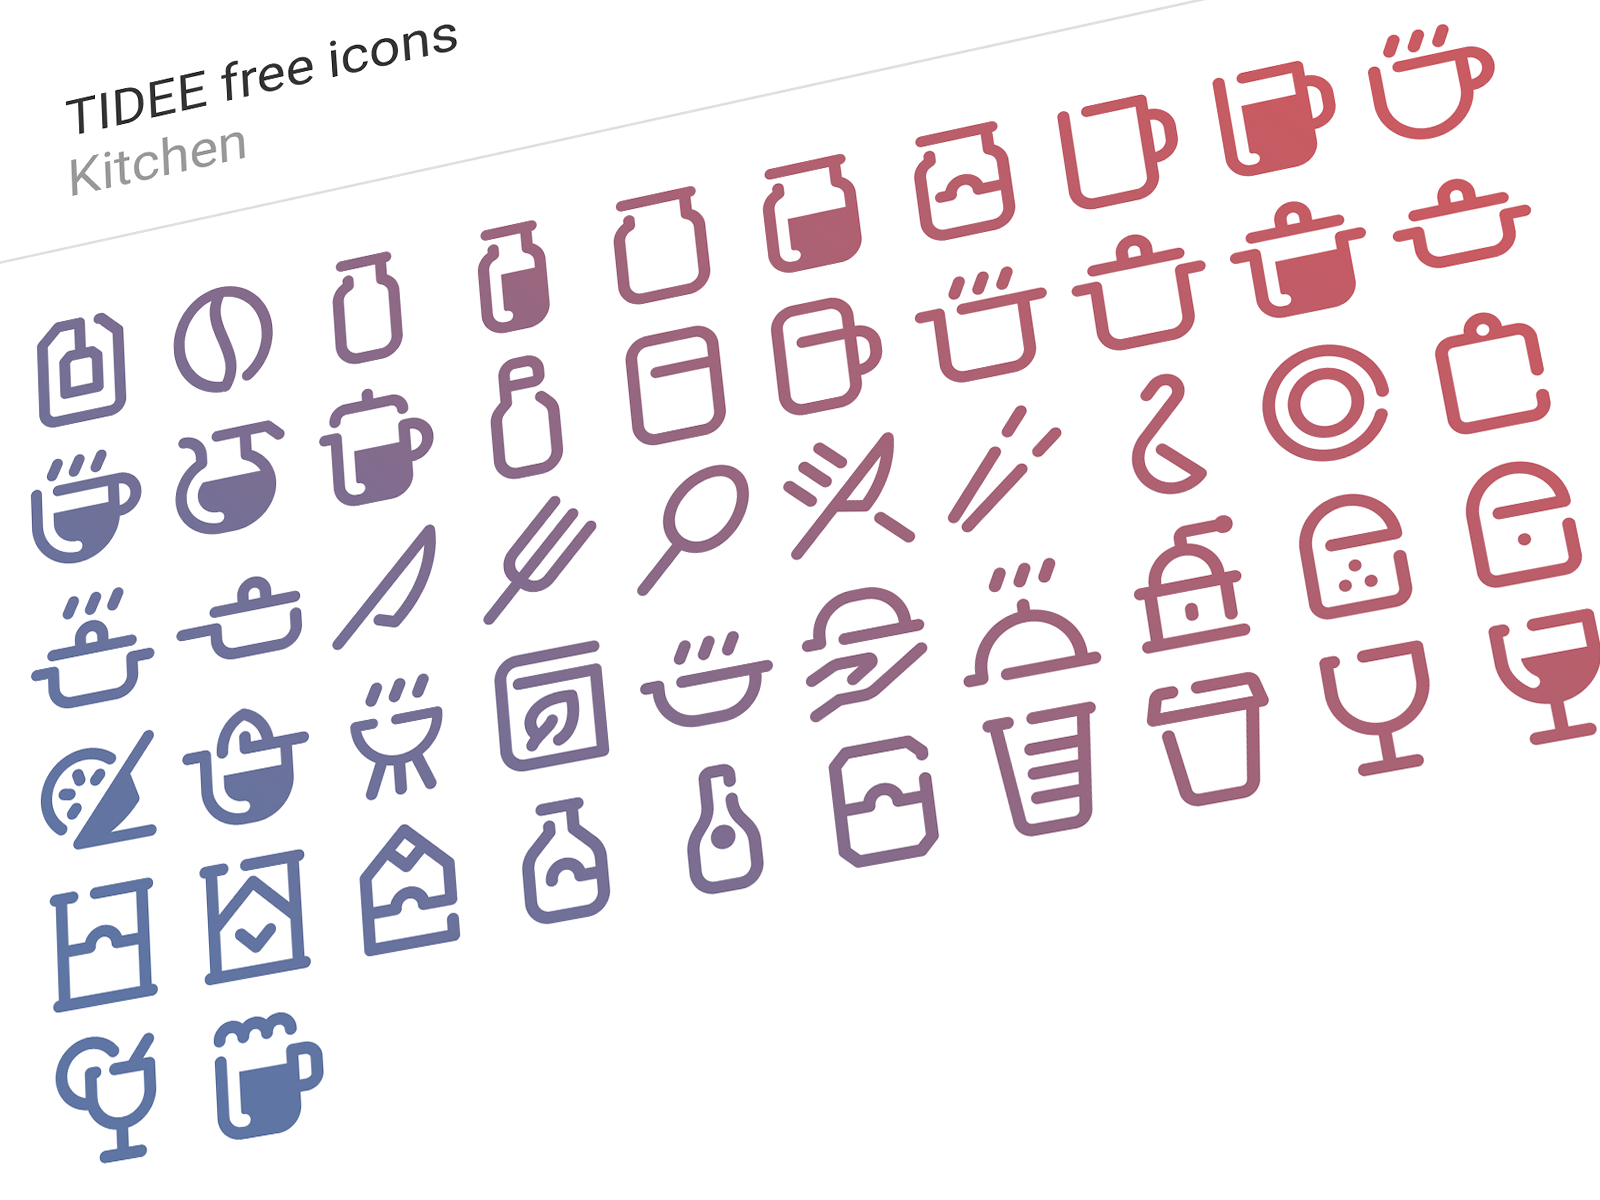 Tidee kitchen icons free bottles coffee cup free glass icojam icons jam jar juicer kitchen outline stroke tidee